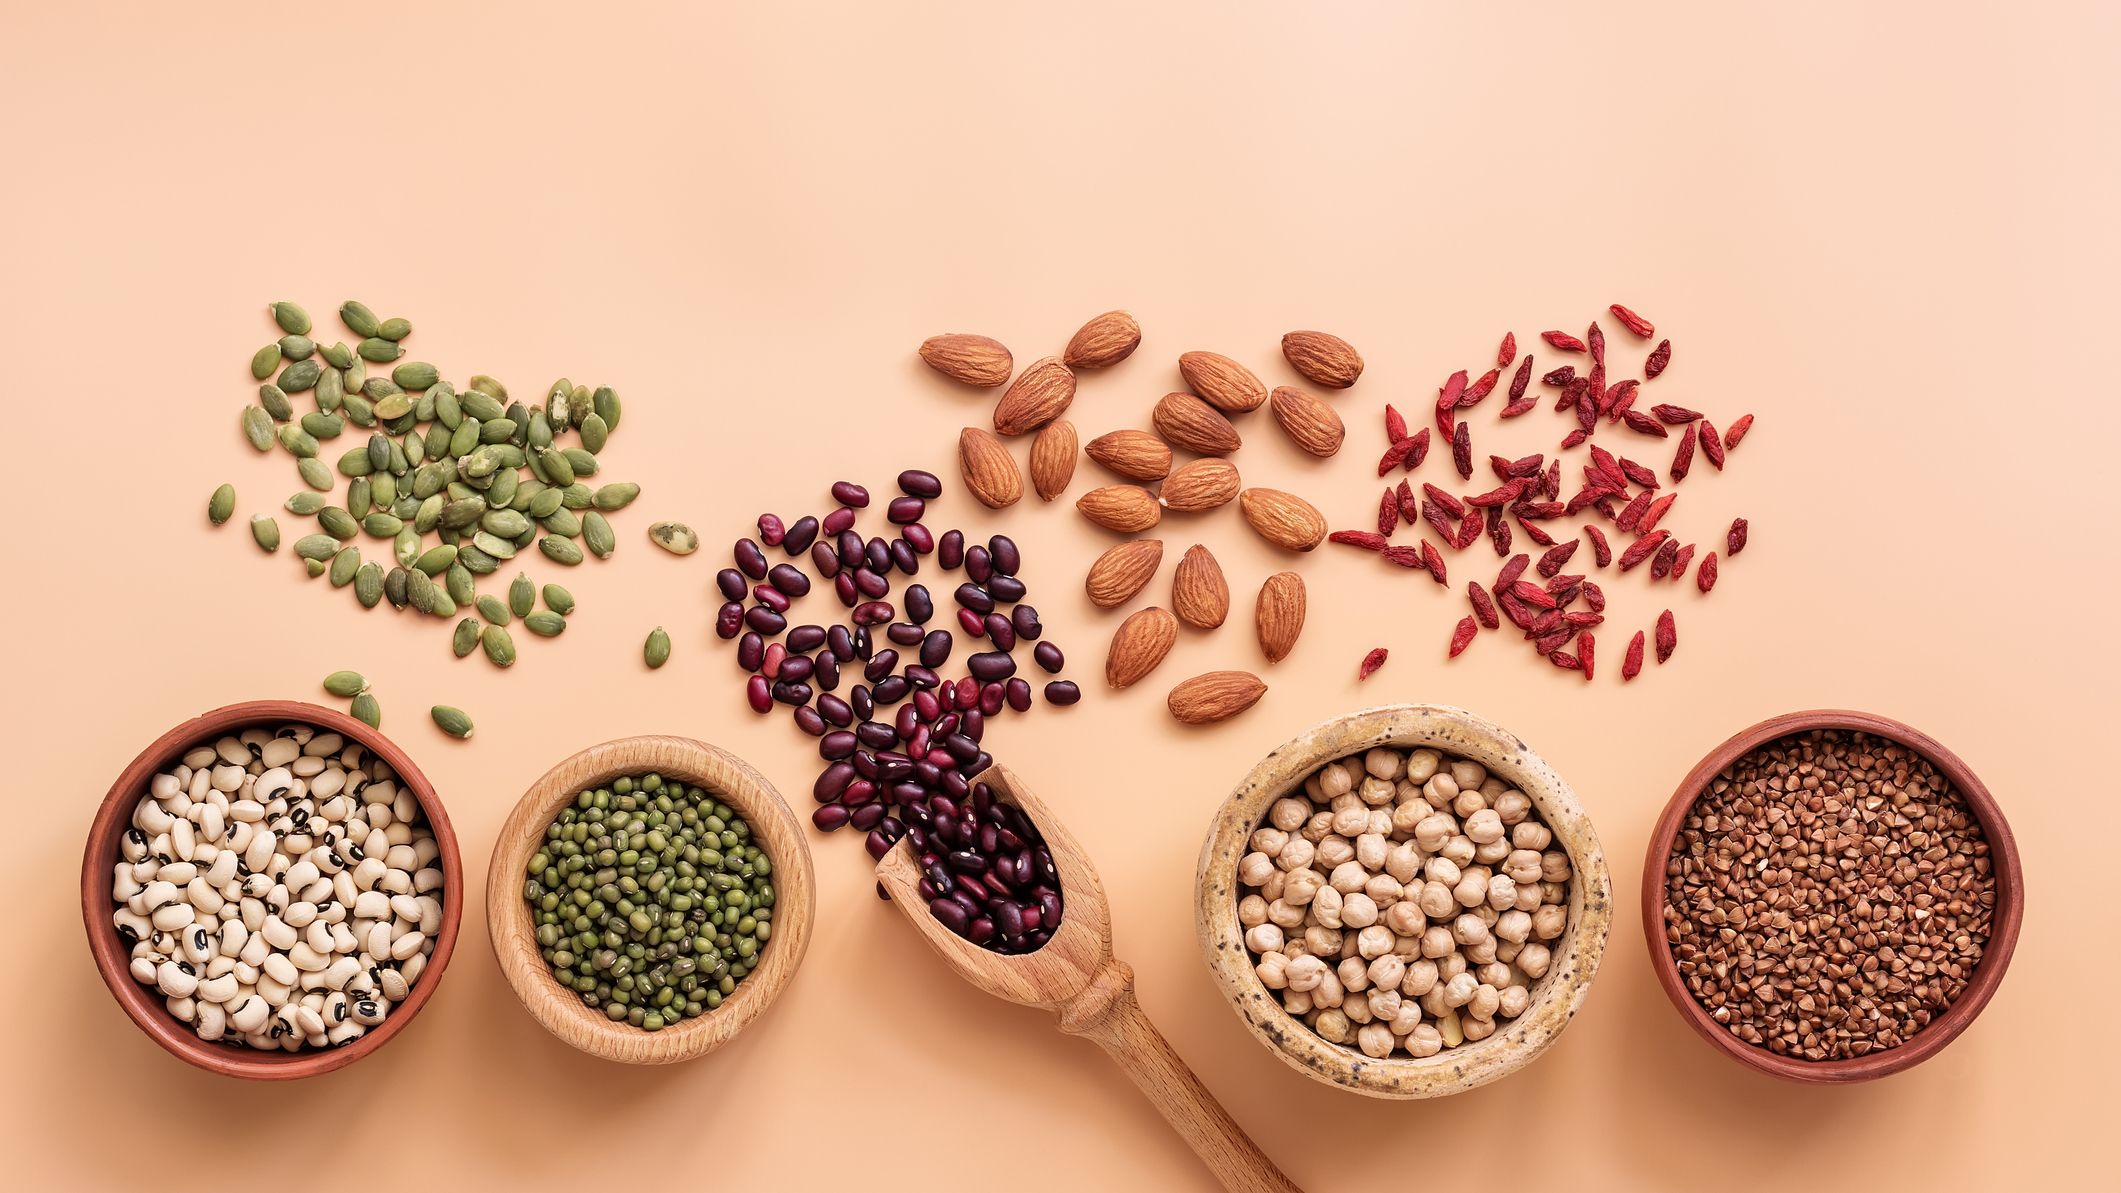 15 Best Plant-Based Protein Sources to Add to Your Diet, According to a Dietitian